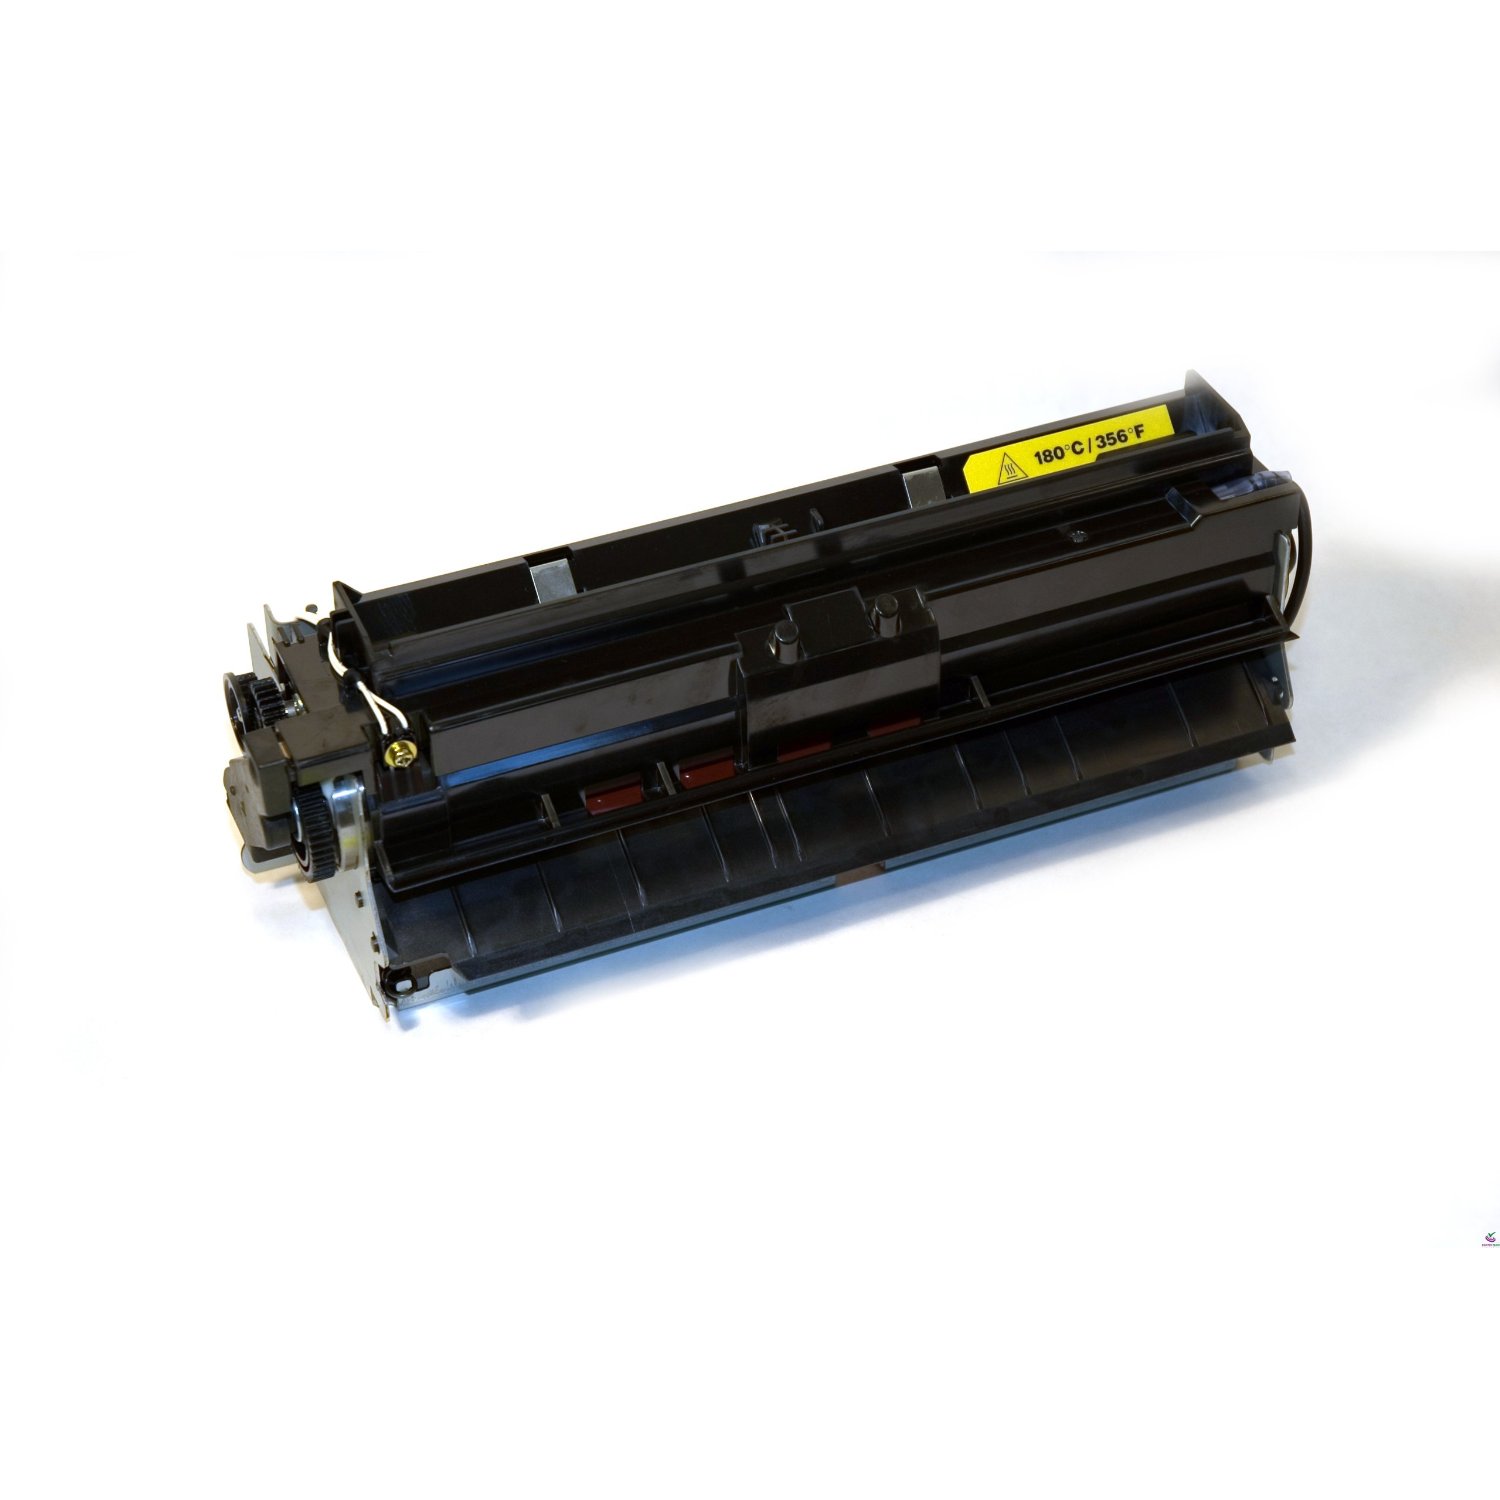 Lexmark T630/T632: Lexmark 12A7465 Remanufactured Black Toner Cartridge for T630/632/634 and X630/632 Series